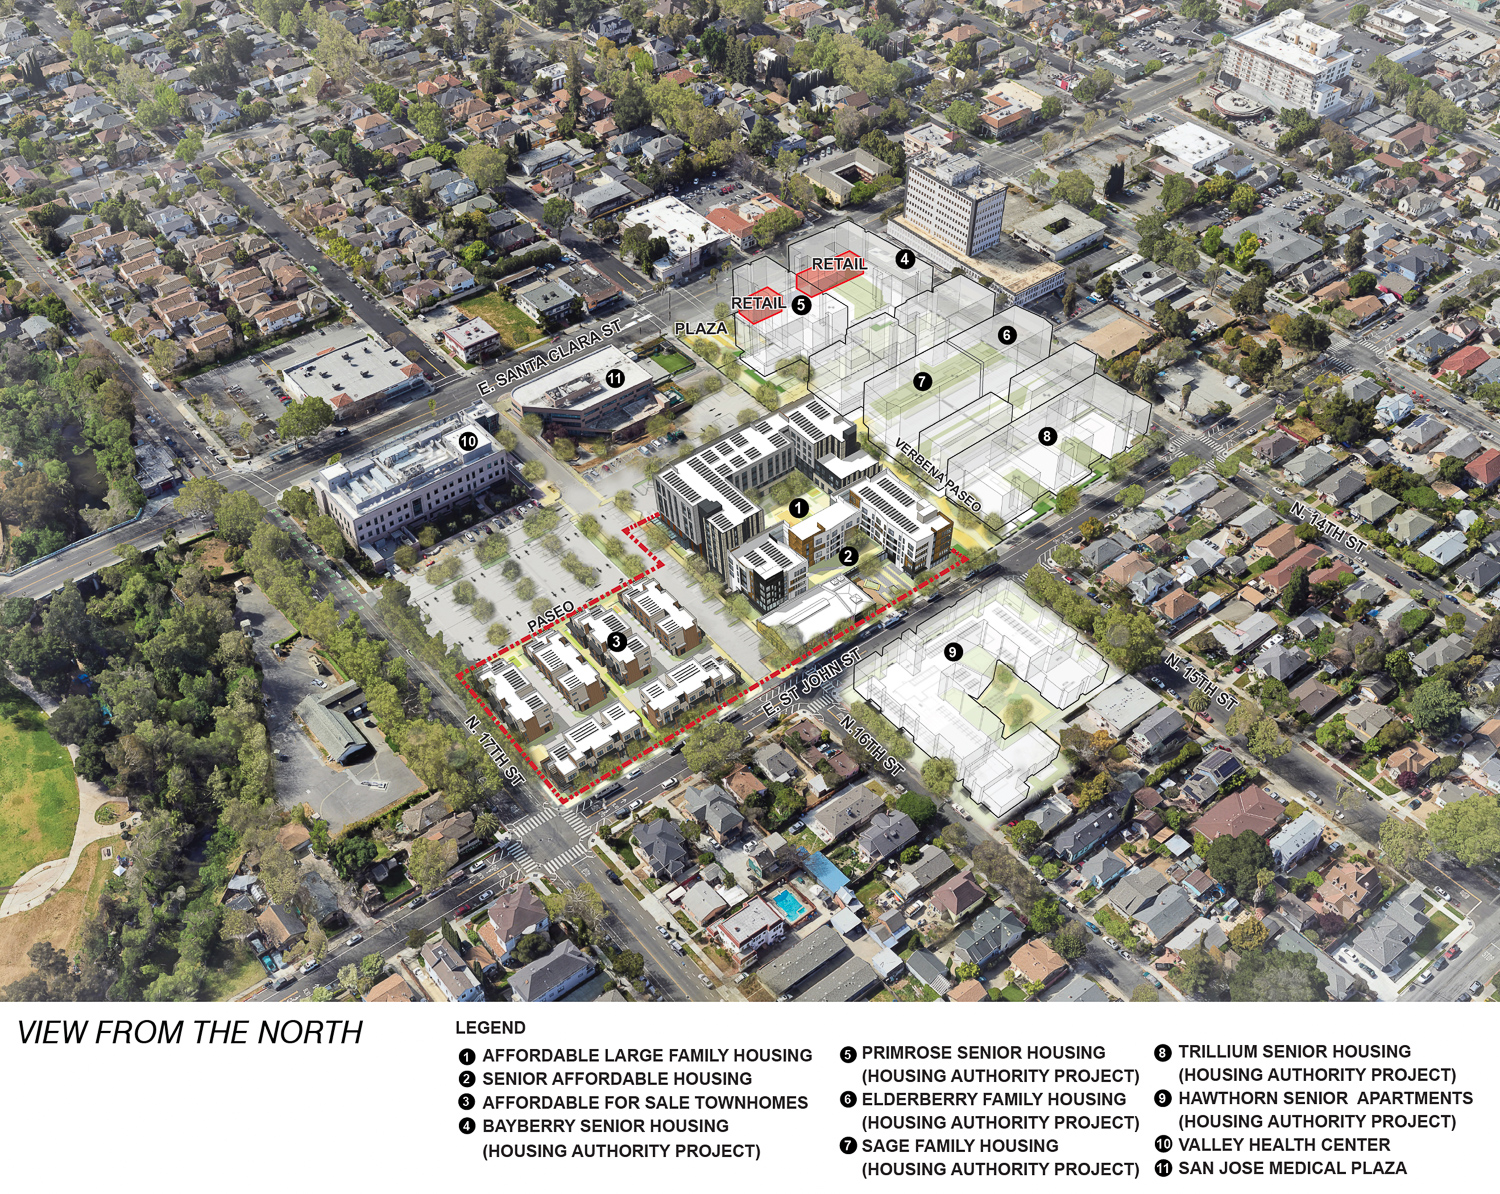 East Santa Clara Street master plan phase two, image published by the City of San Jose